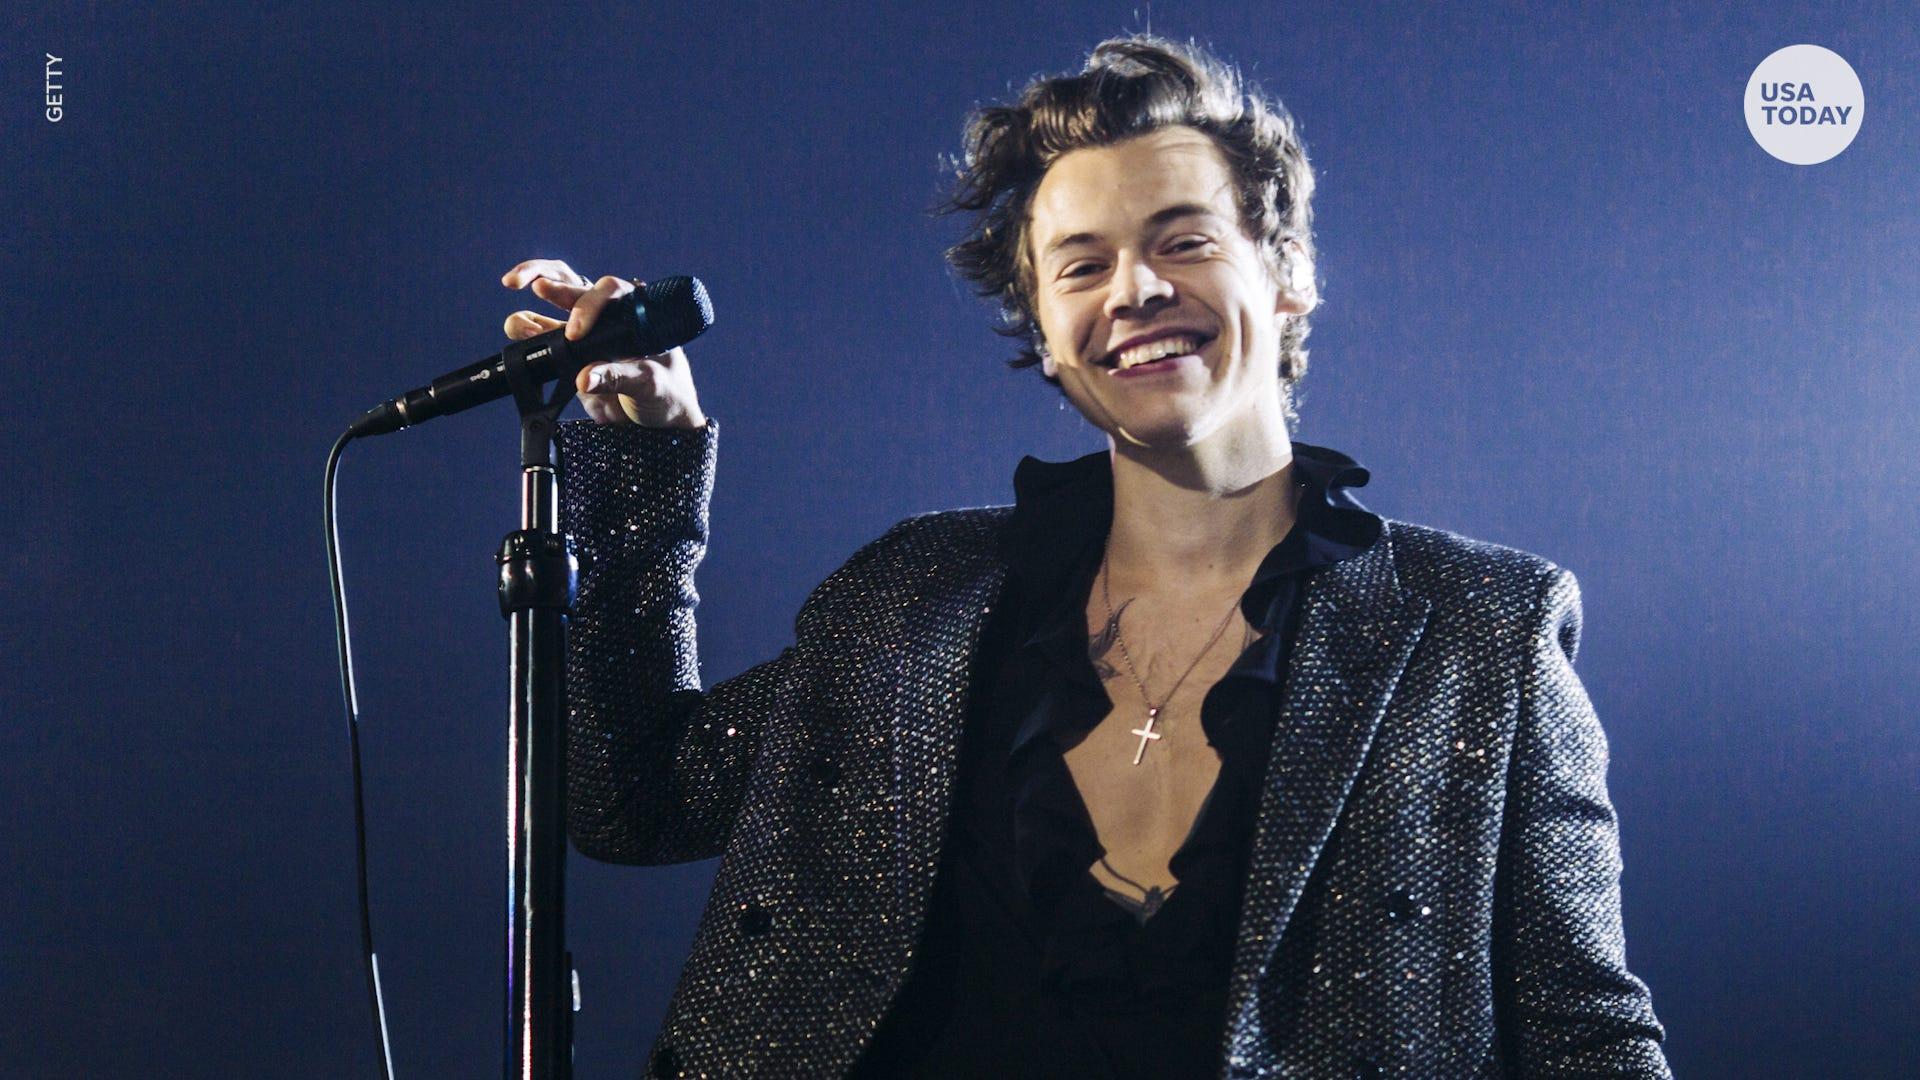 Twitter is here for Harry Styles being part of ‘The Little Mermaid’ world as Prince Eric